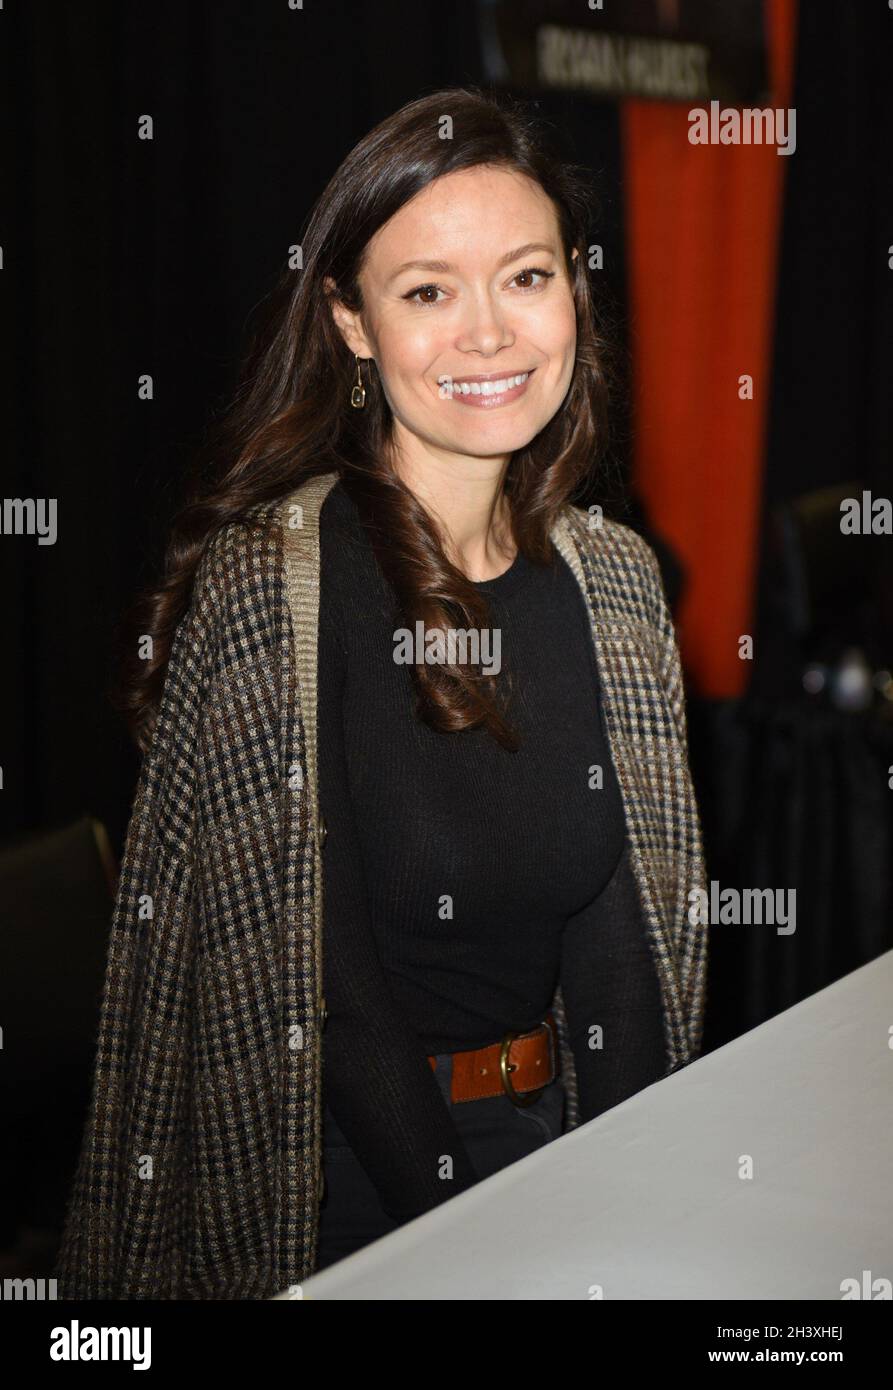 Knoxville, TN, USA. 29th Oct, 2021. Summer Glau in attendance for FANBOY EXPO, Knoxville Convention Center, Knoxville, TN October 29, 2021. Credit: Derek Storm/Everett Collection/Alamy Live News Stock Photo